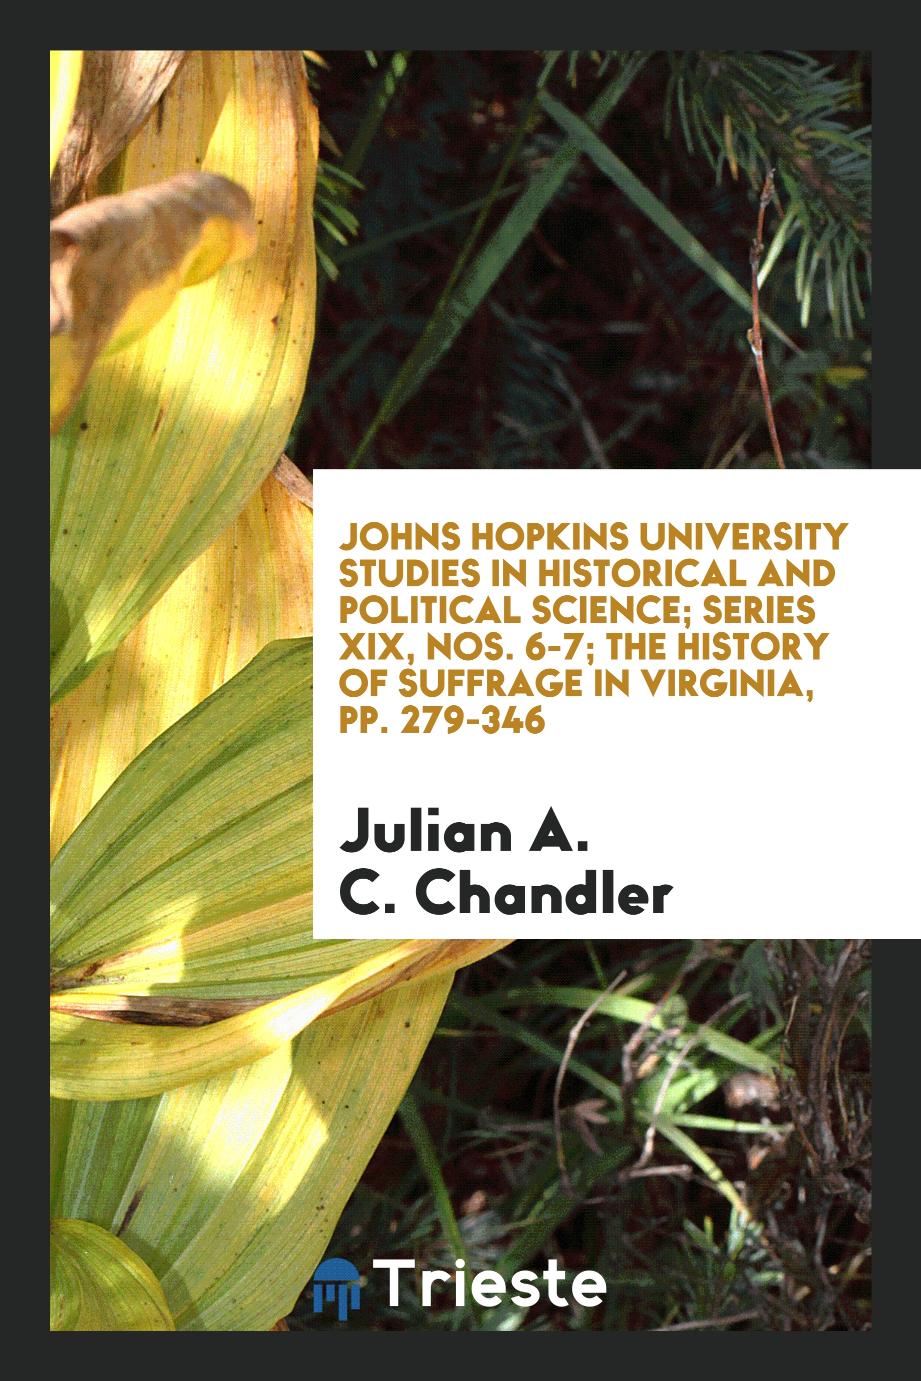 Johns Hopkins University Studies in Historical and Political Science; Series XIX, Nos. 6-7; The History of Suffrage in Virginia, pp. 279-346